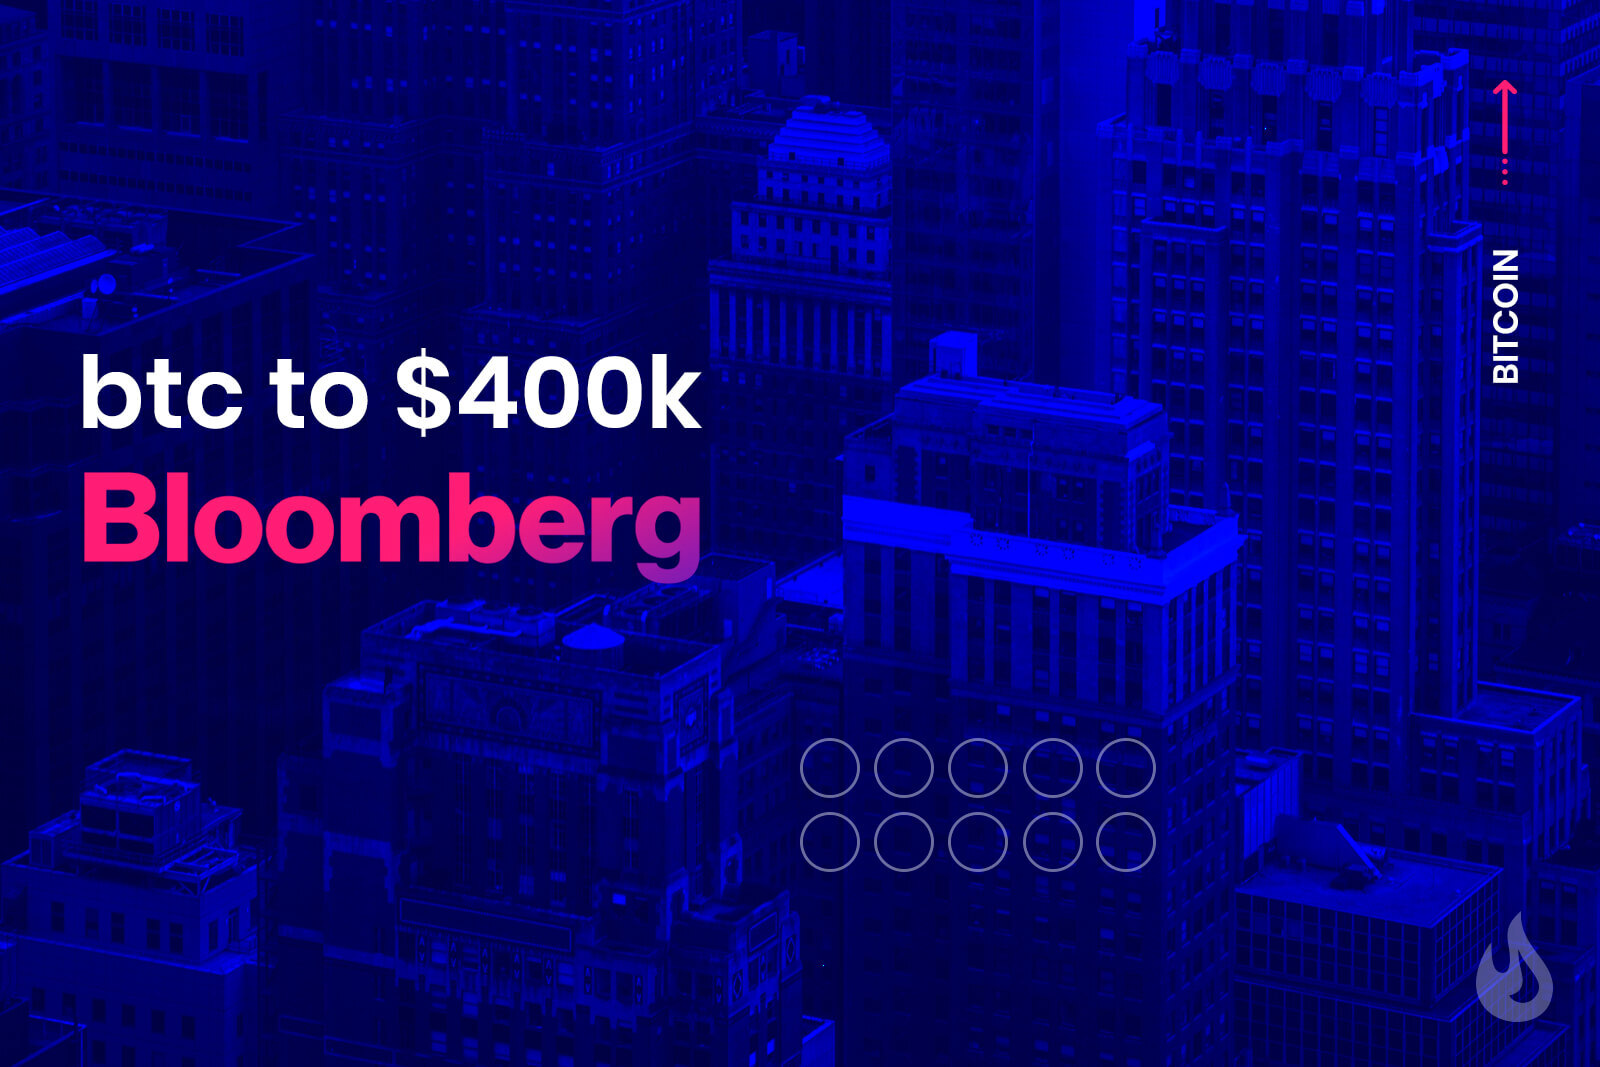 Bloomberg Publishes Bitcoin Raise To $400k